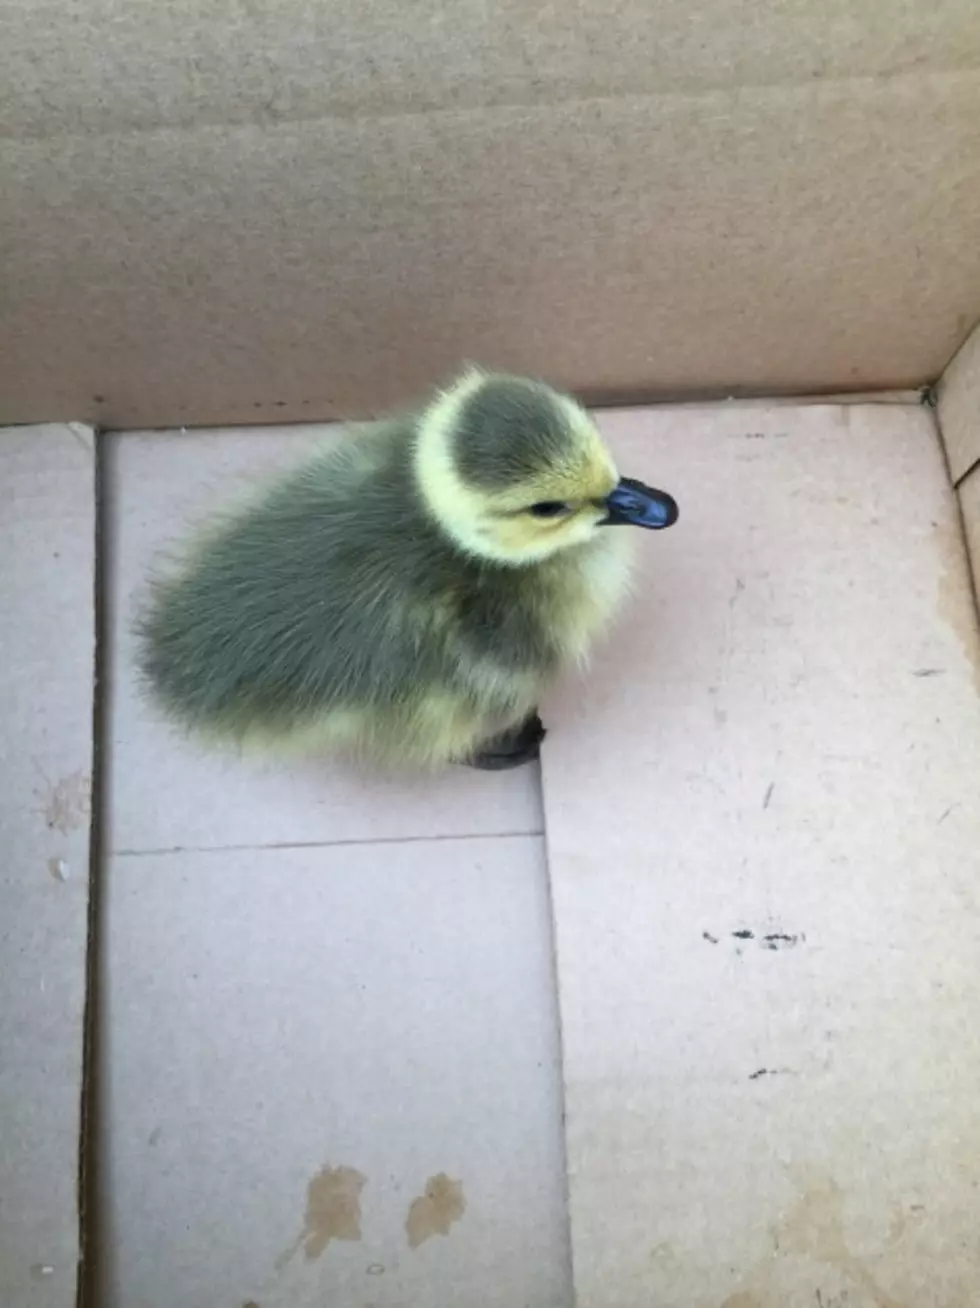 Meet Travis: The Adorable Little Gosling We Found! [PICTURE]